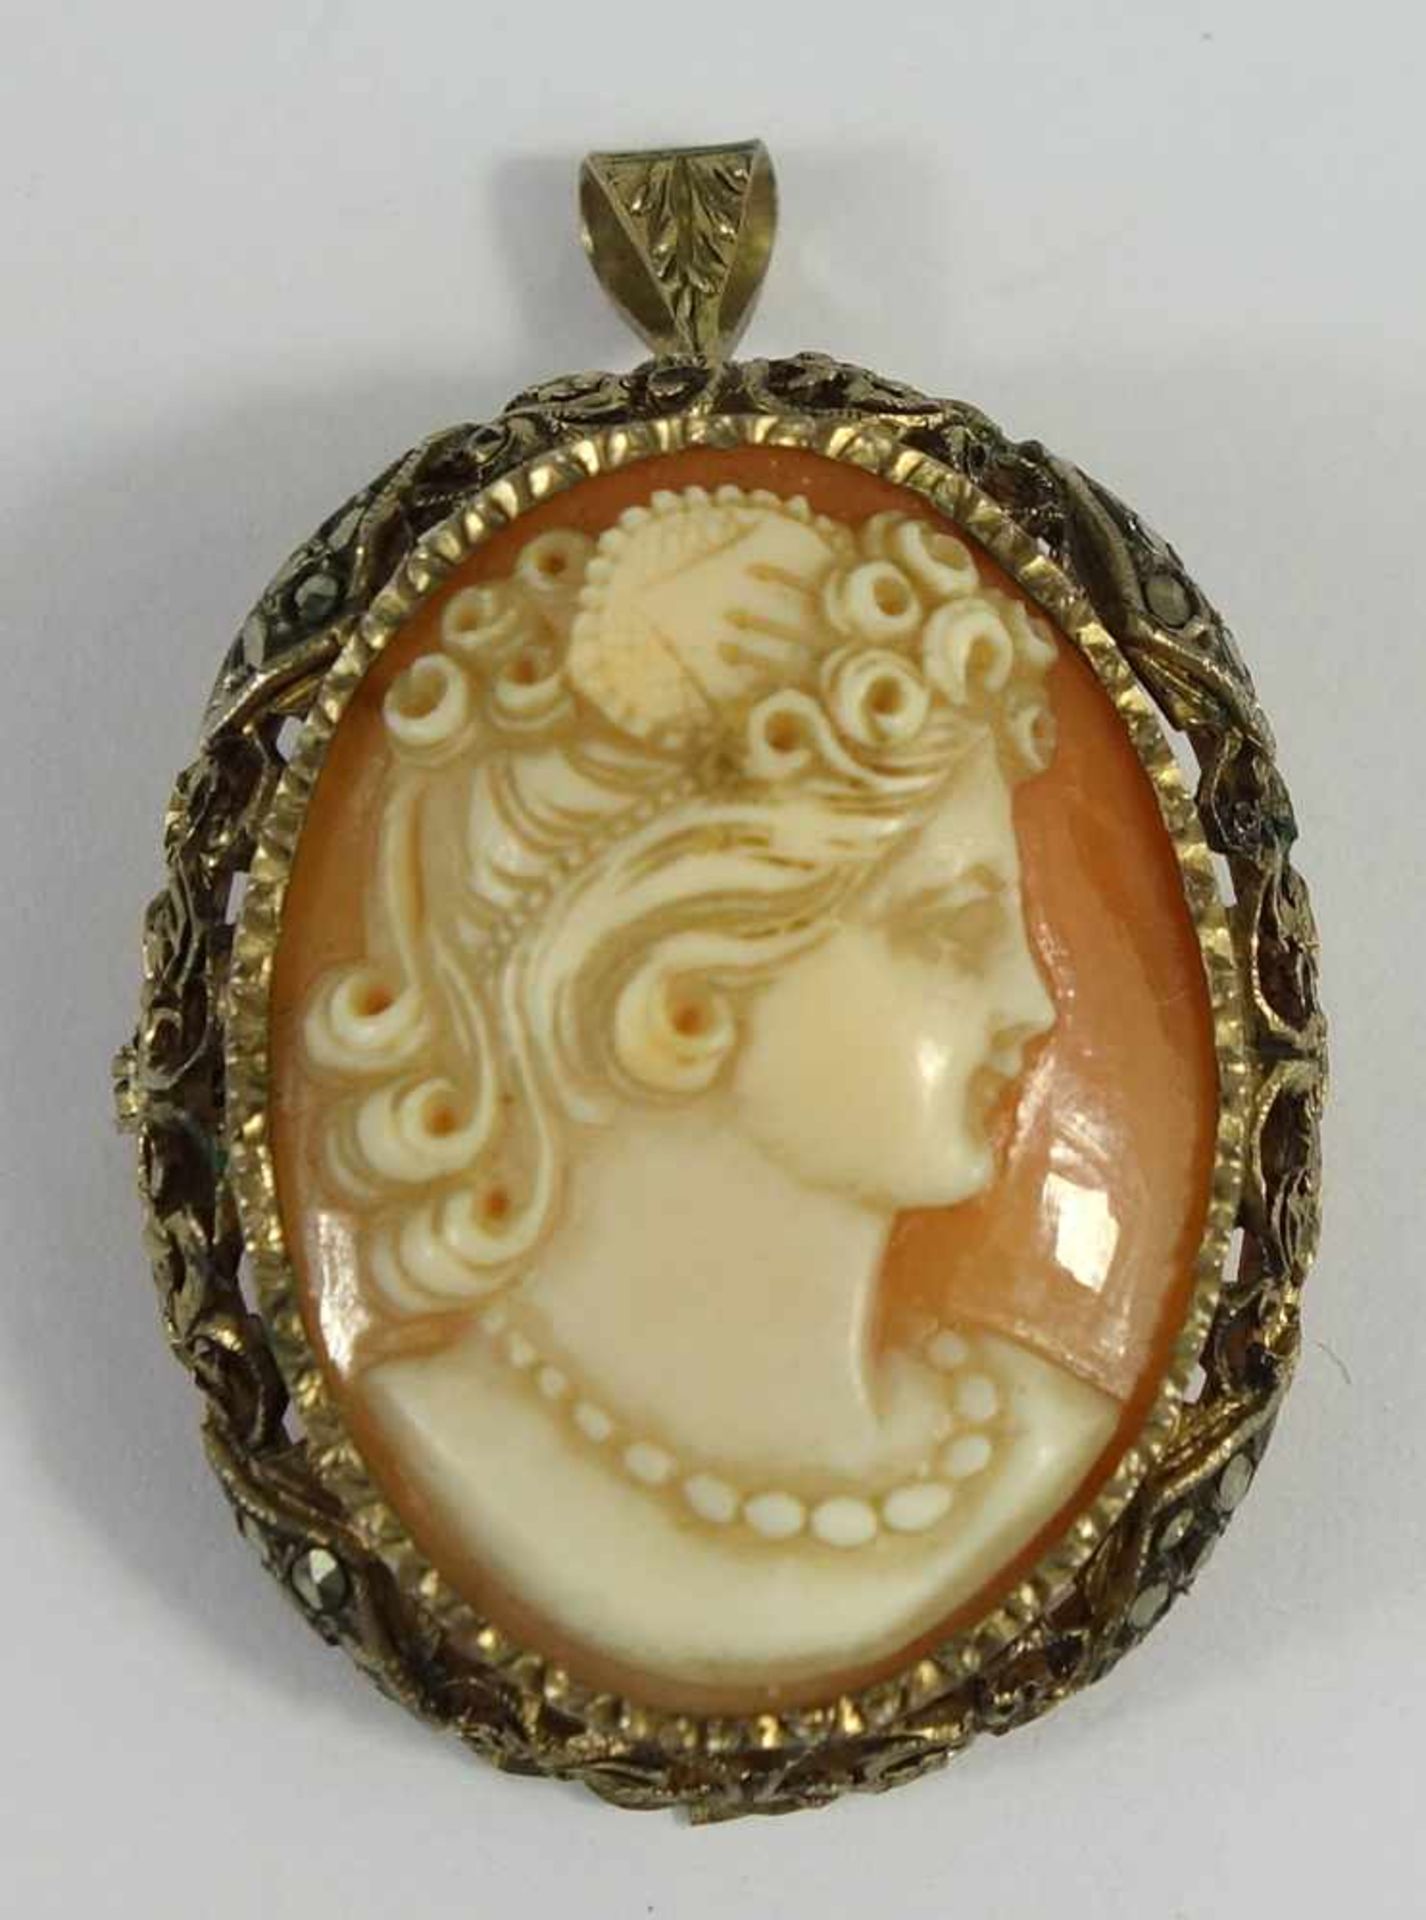 Pendant/brooch with shell cameo in filigree silver setting, c. 1890